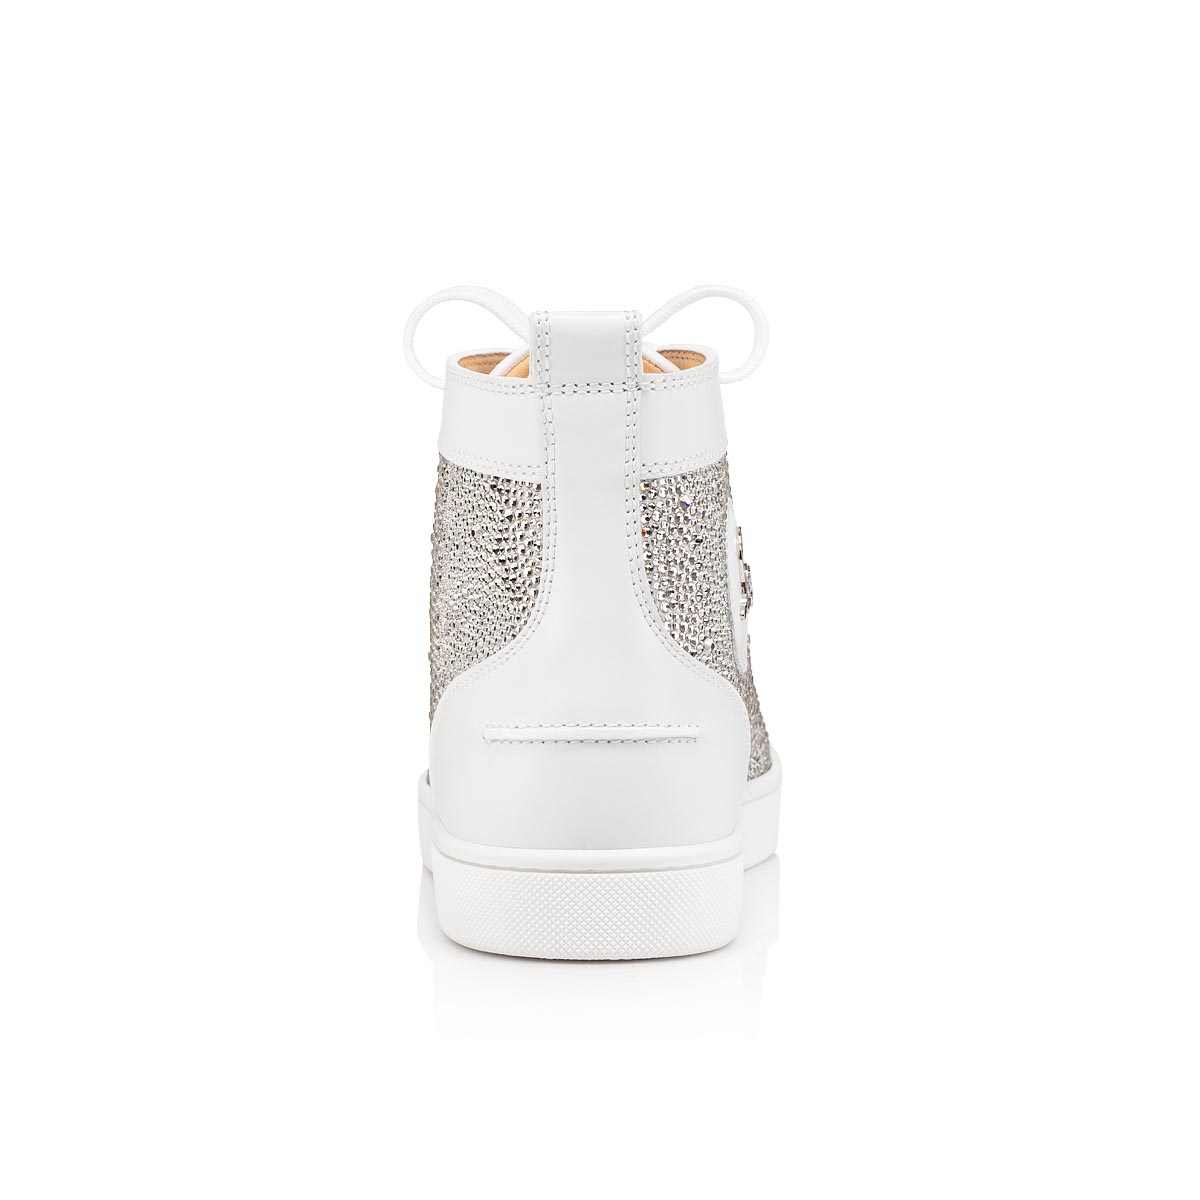 Louis Strass Loubiguana - High-top sneakers - Suede and strass - Multicolor  - Christian Louboutin